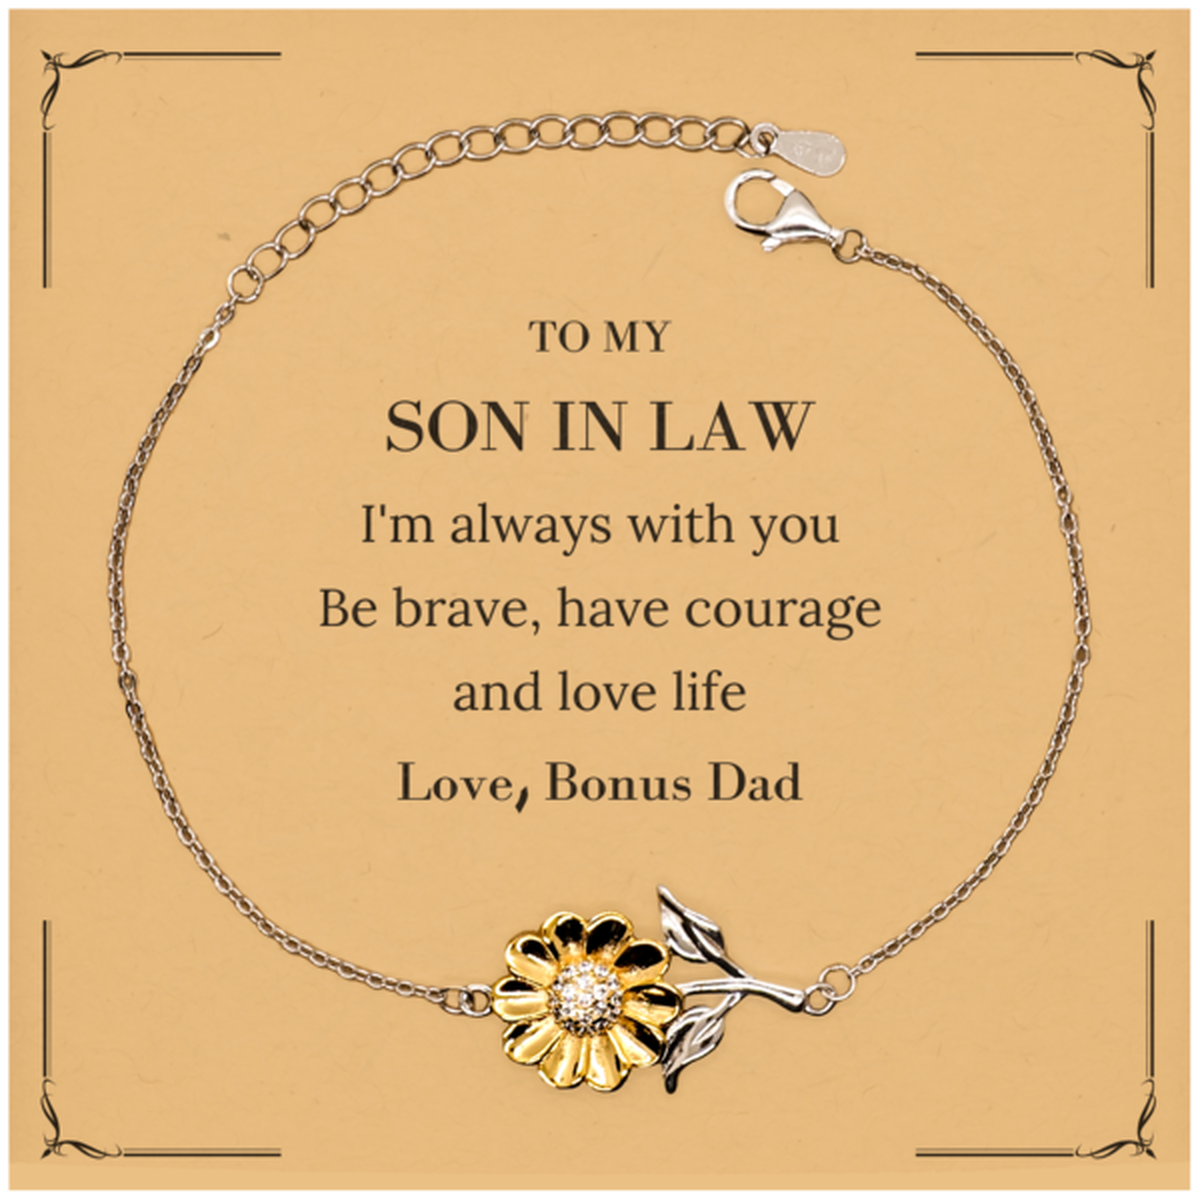 To My Son In Law Gifts from Bonus Dad, Unique Sunflower Bracelet Inspirational Christmas Birthday Graduation Gifts for Son In Law I'm always with you. Be brave, have courage and love life. Love, Bonus Dad